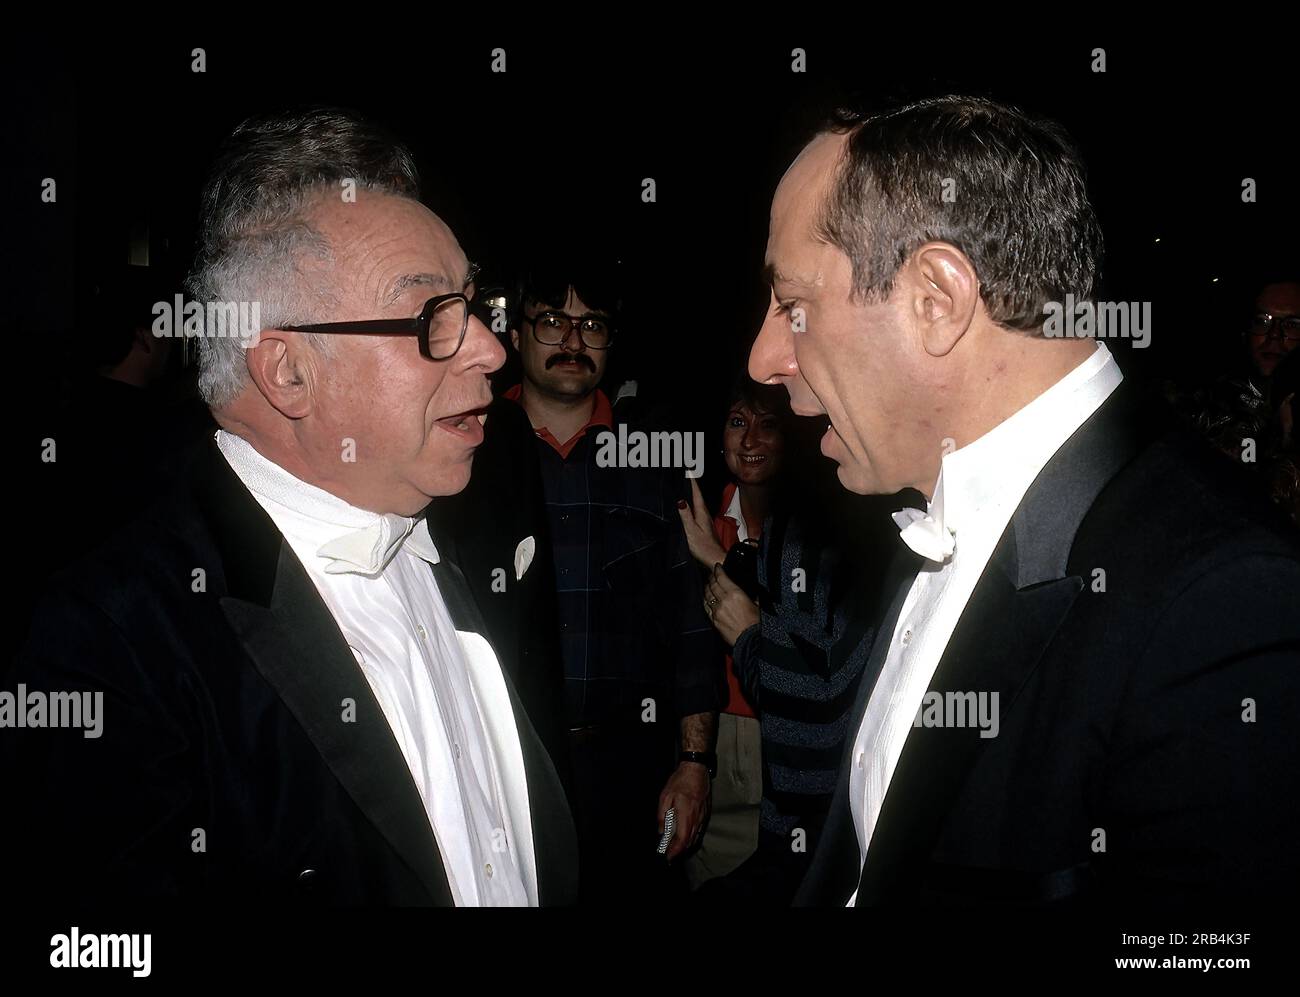 WASHINGTON DC - MARCH 26, 1988 Art Buchwald and New York Governor Mario Cuono stop to chat as they attend the White Tie Gridiron Club dinner at the Capitol Hilton hotel. Stock Photo